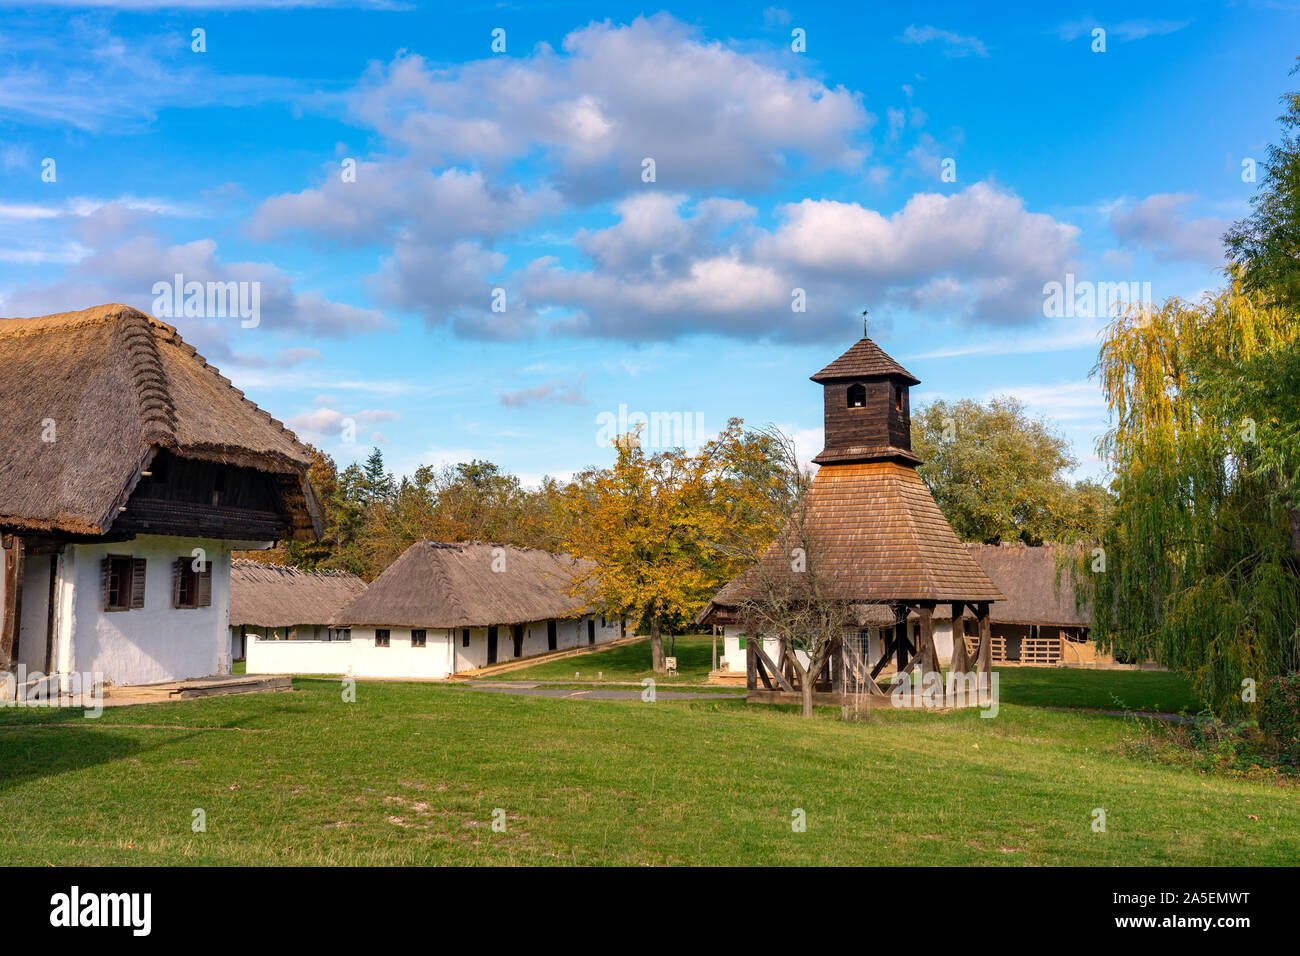 Historical old hungarian village with straw roof houses a bell tower Stock Photo